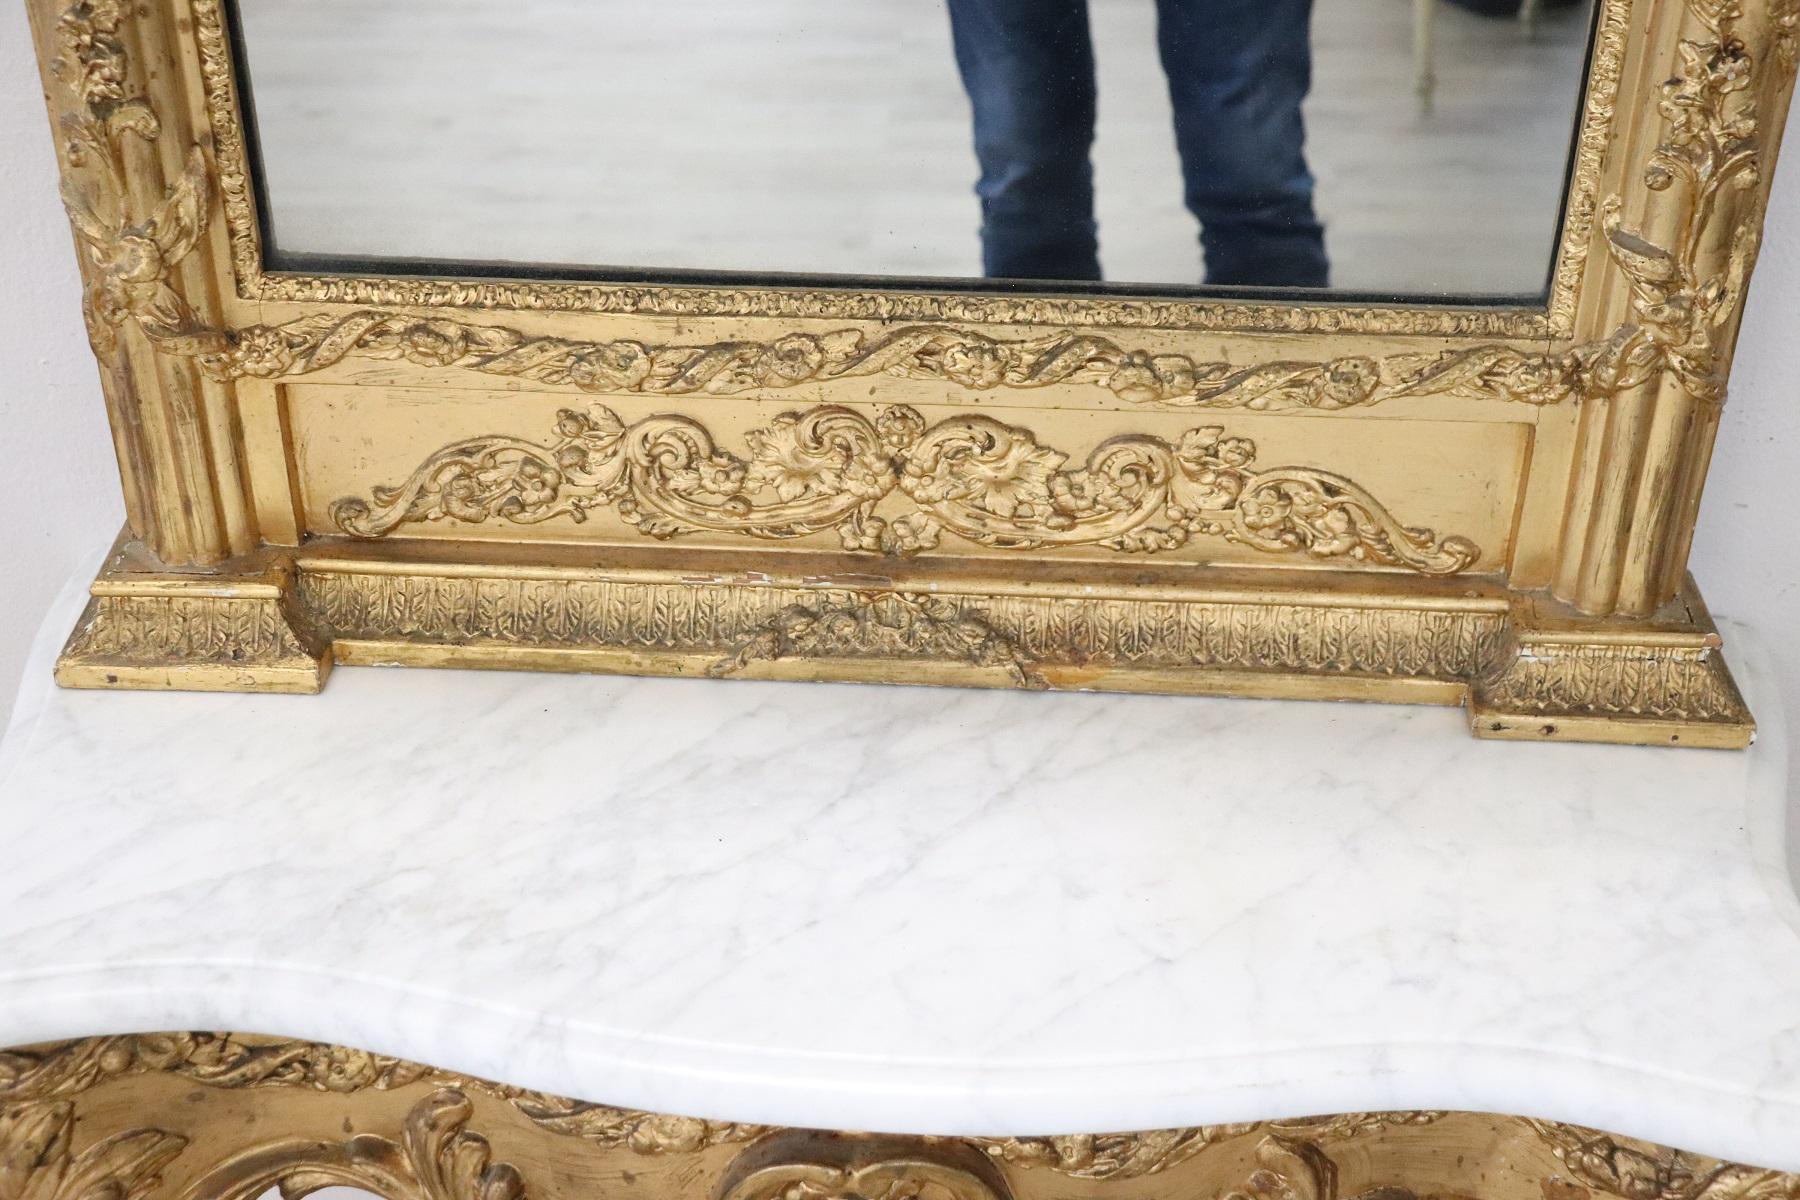 Gilt 19th Century Italian Carved and Gilded Wood Luxury Console Table with Mirror